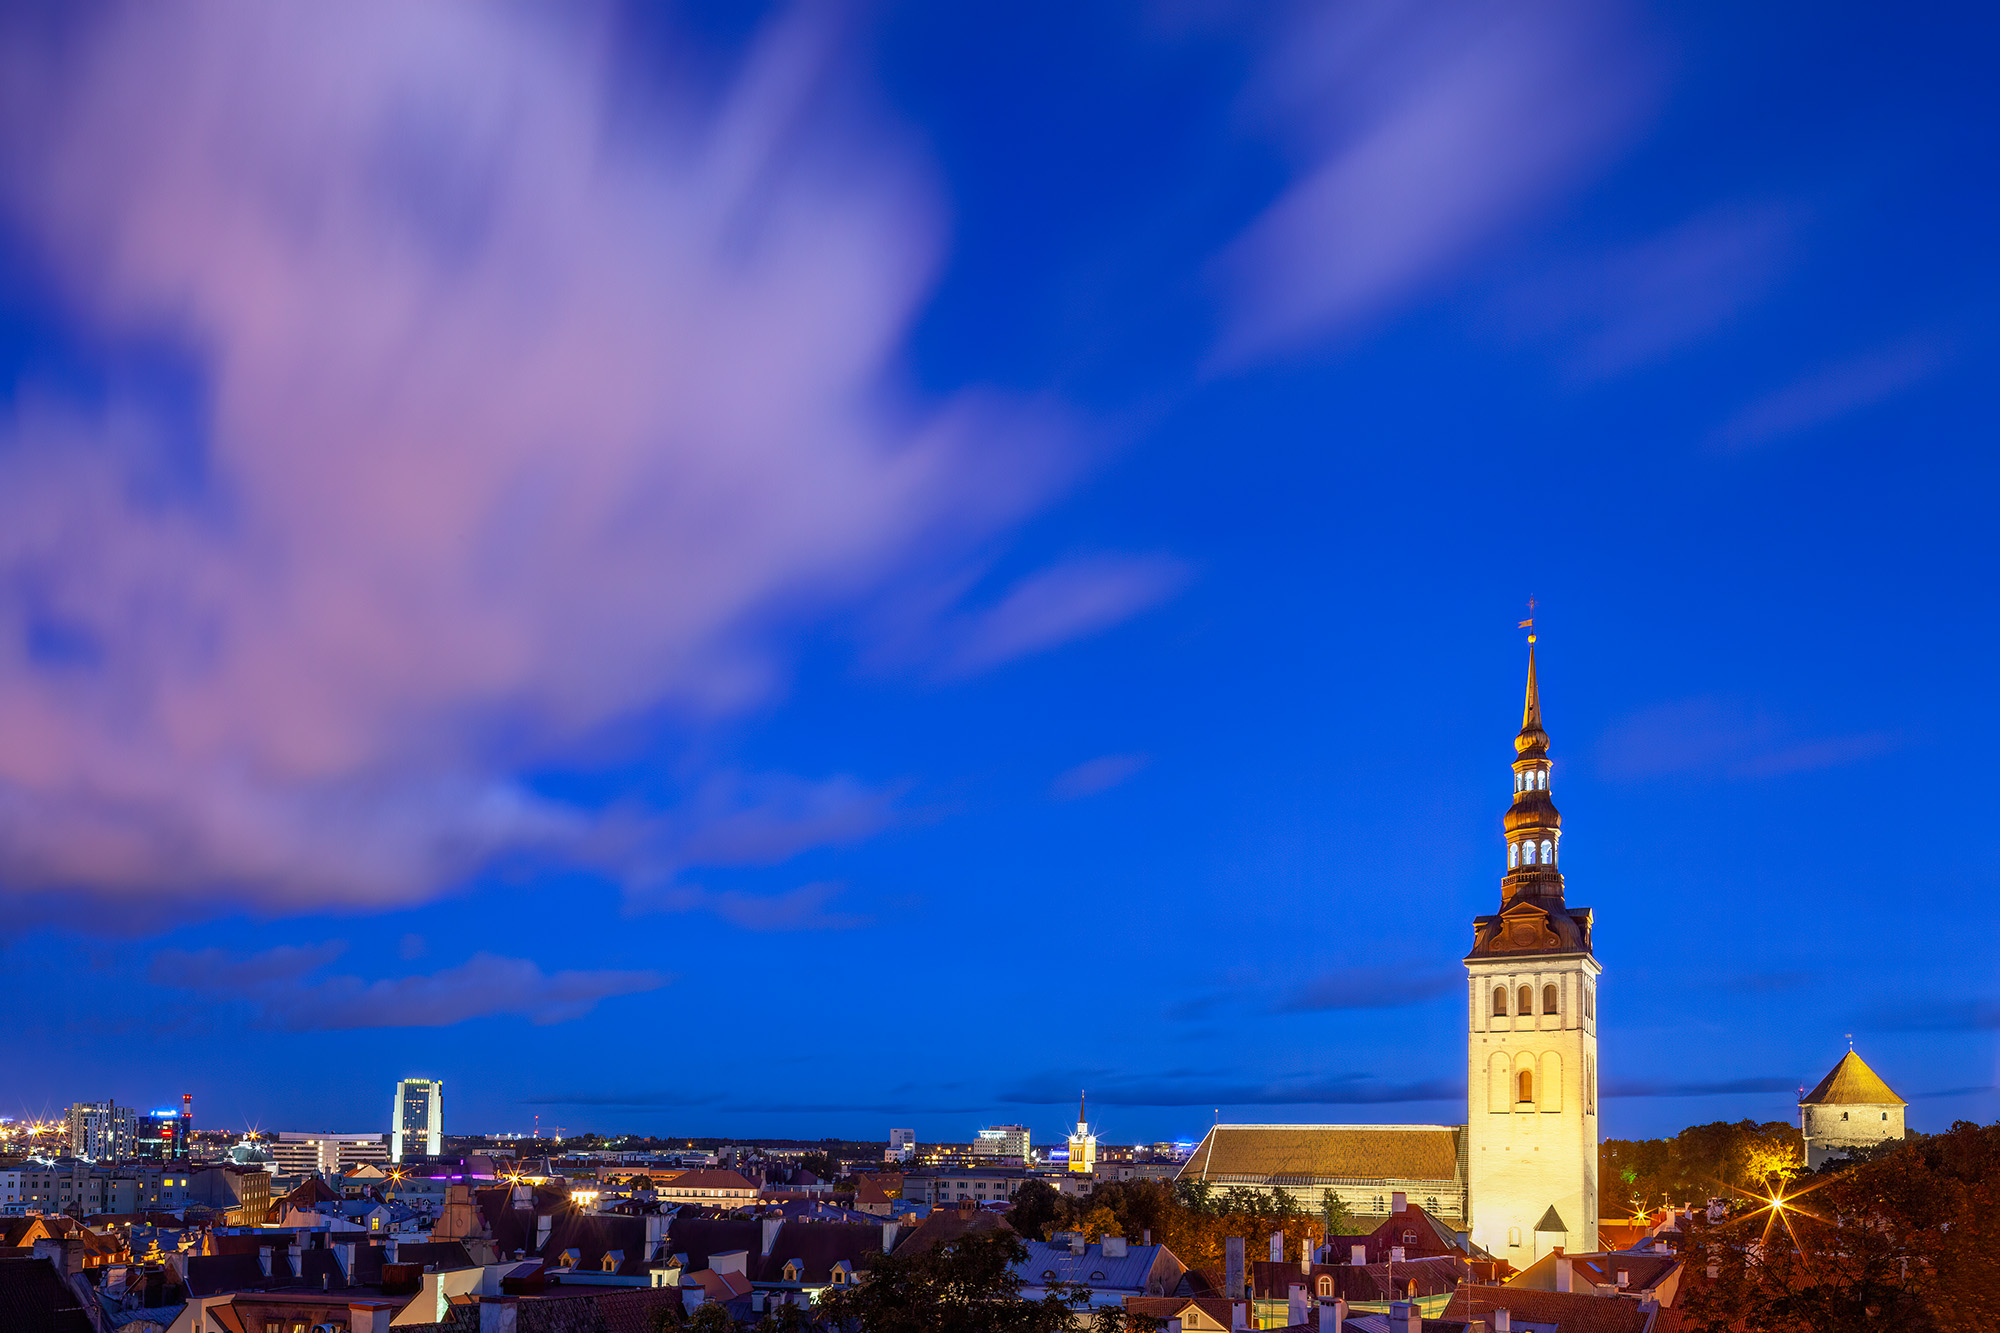 This enchanting horizontal image captures the beauty of Tallinn, Estonia, during the serene blue hour. St. Olaf's Church stands...